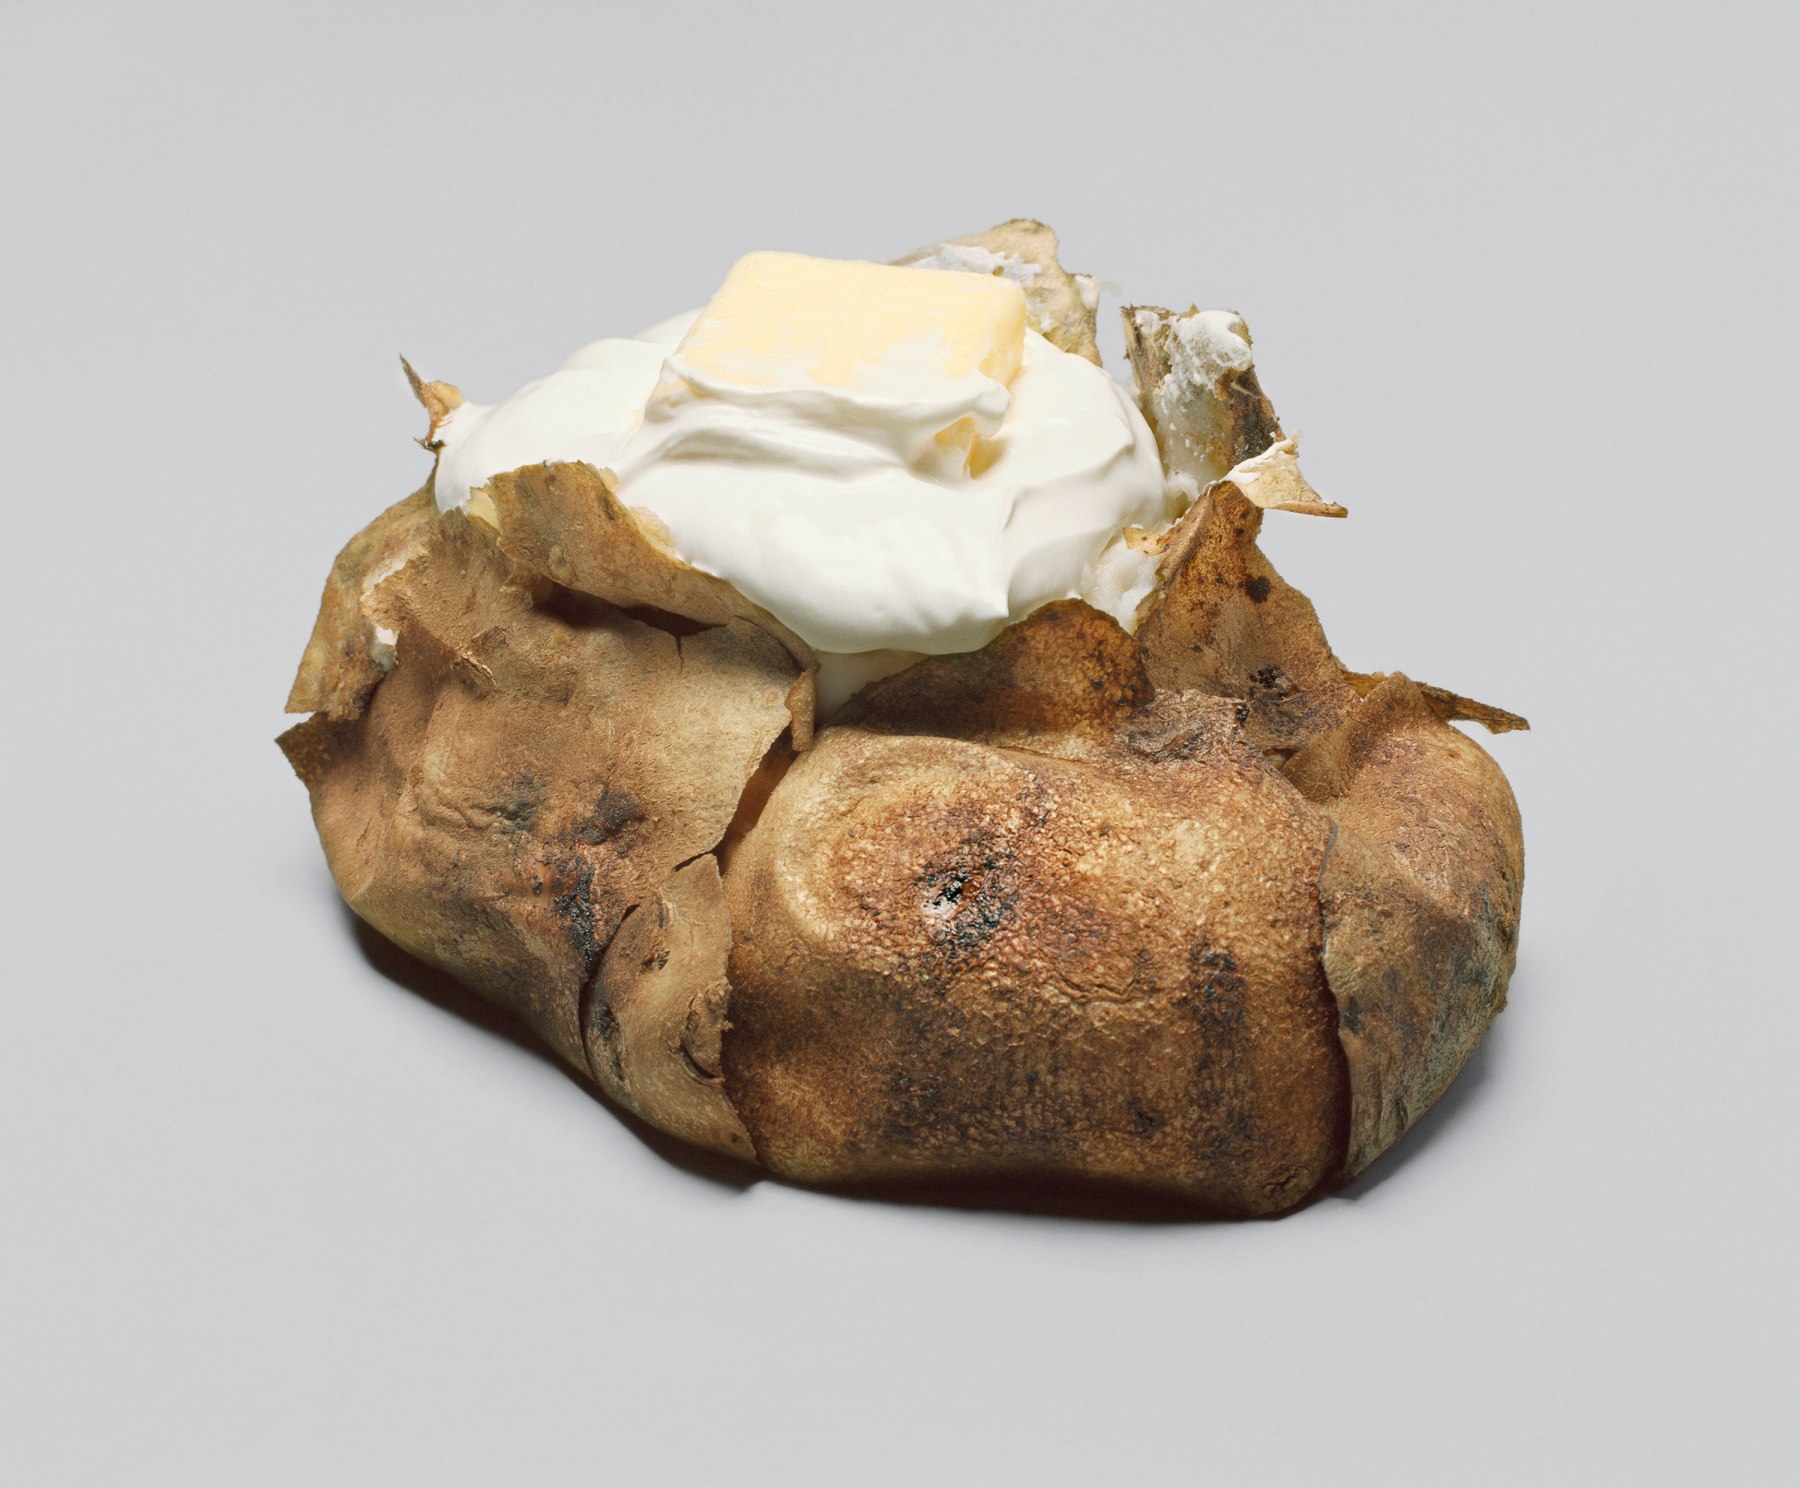 Oversized baked potato with sour cream and butter based on Claes Oldenburg sculpture. Presented as a photograph.